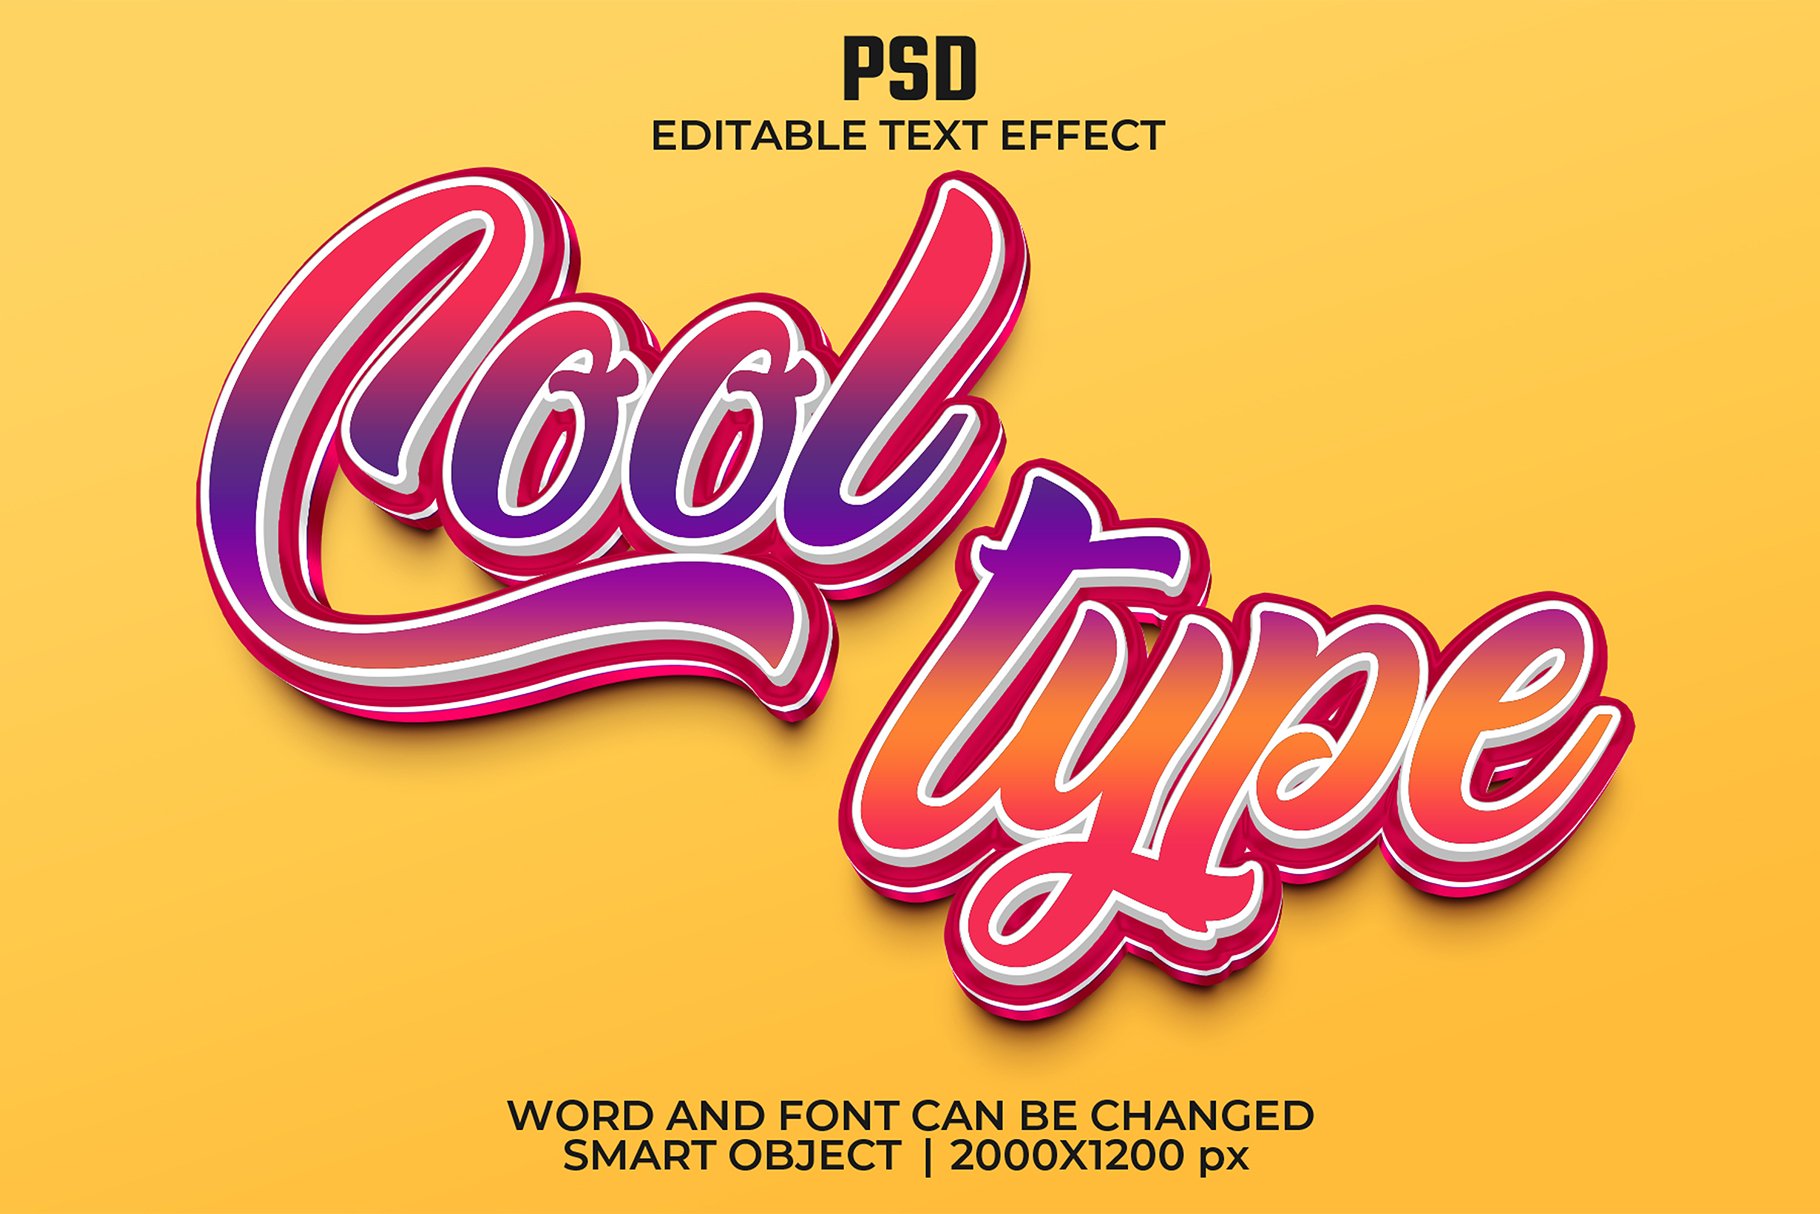 Trendy 3d Editable Text Effect Stylecover image.